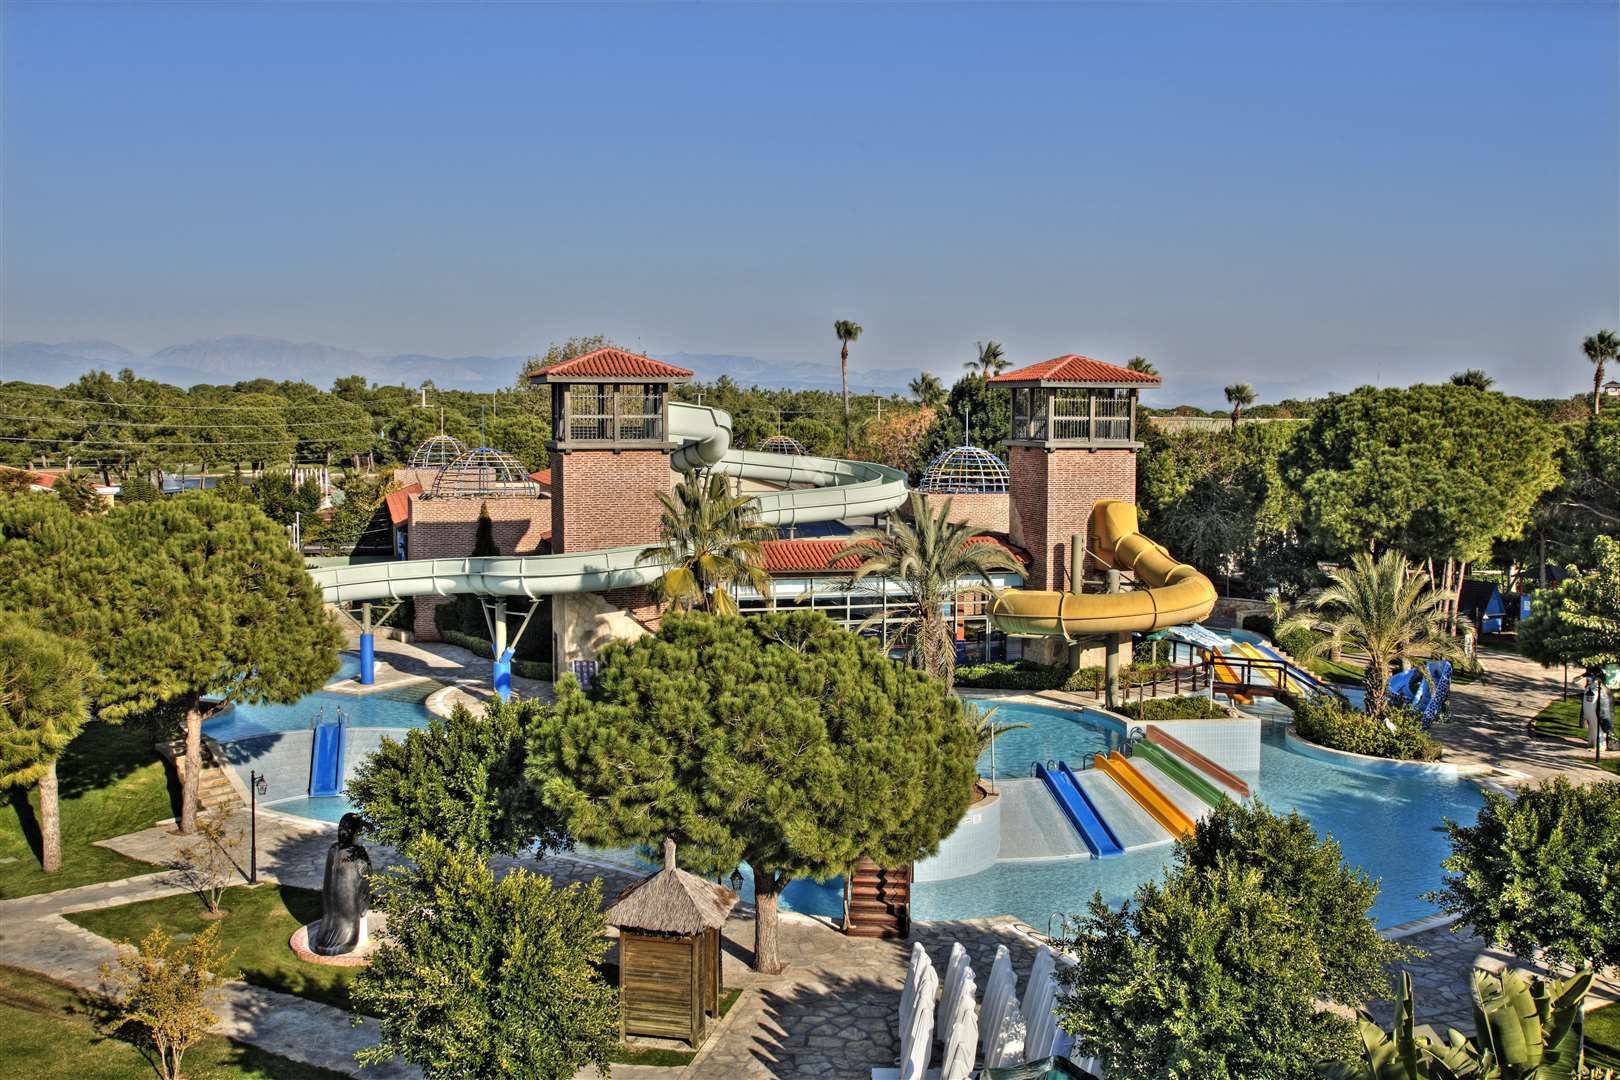 A water park at Gloria Golf Resort is great for all the family